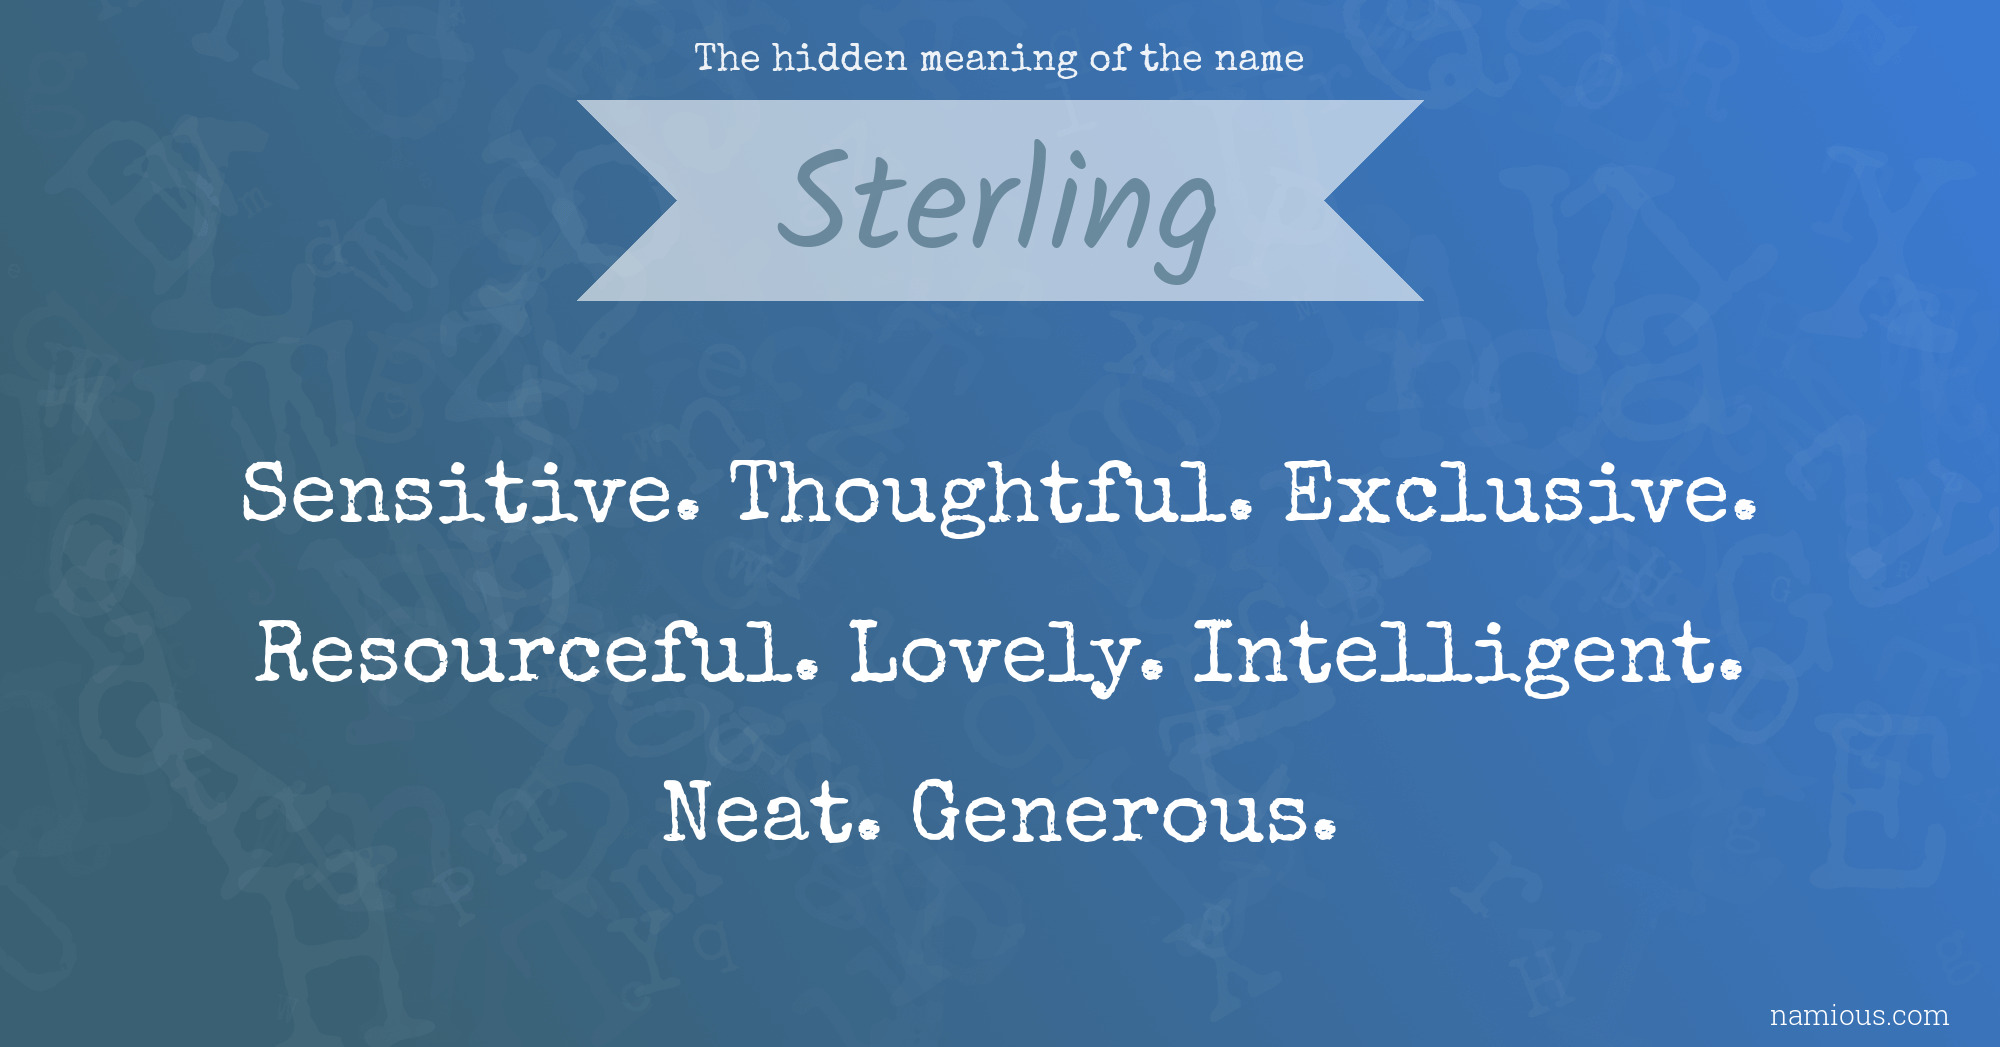 The hidden meaning of the name Sterling